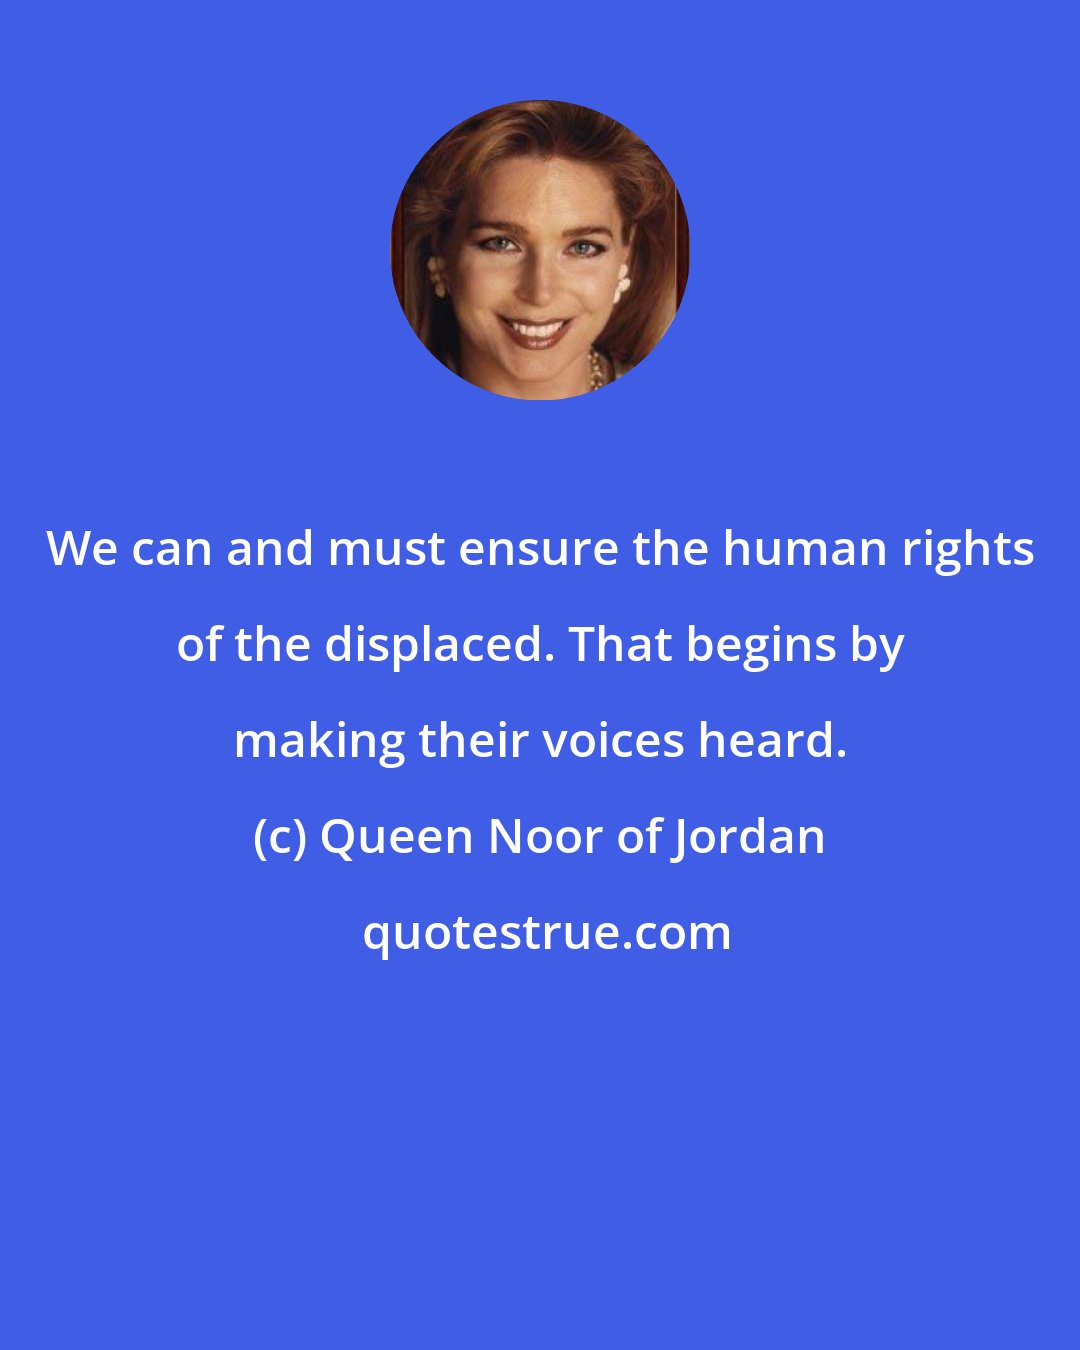 Queen Noor of Jordan: We can and must ensure the human rights of the displaced. That begins by making their voices heard.